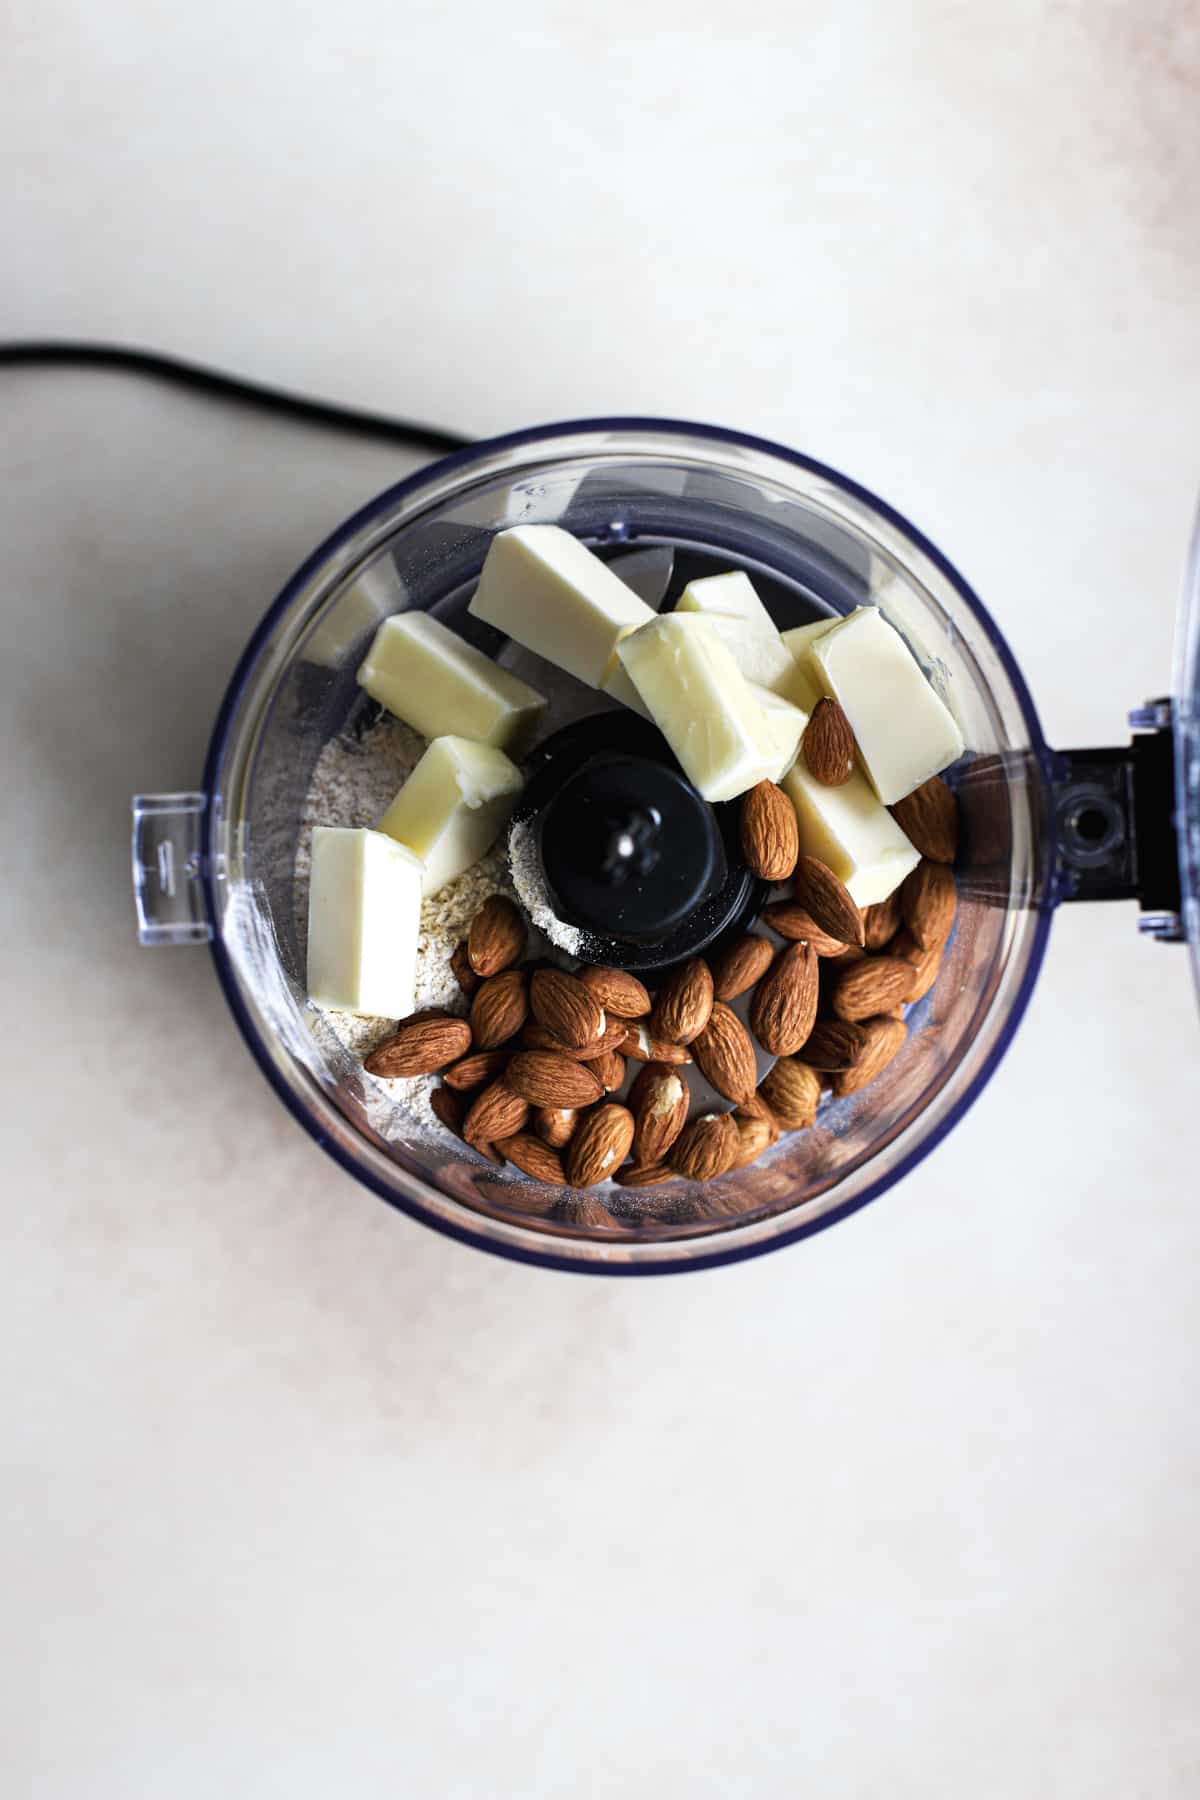 White whole wheat flour, almonds, and butter cubes in food processor